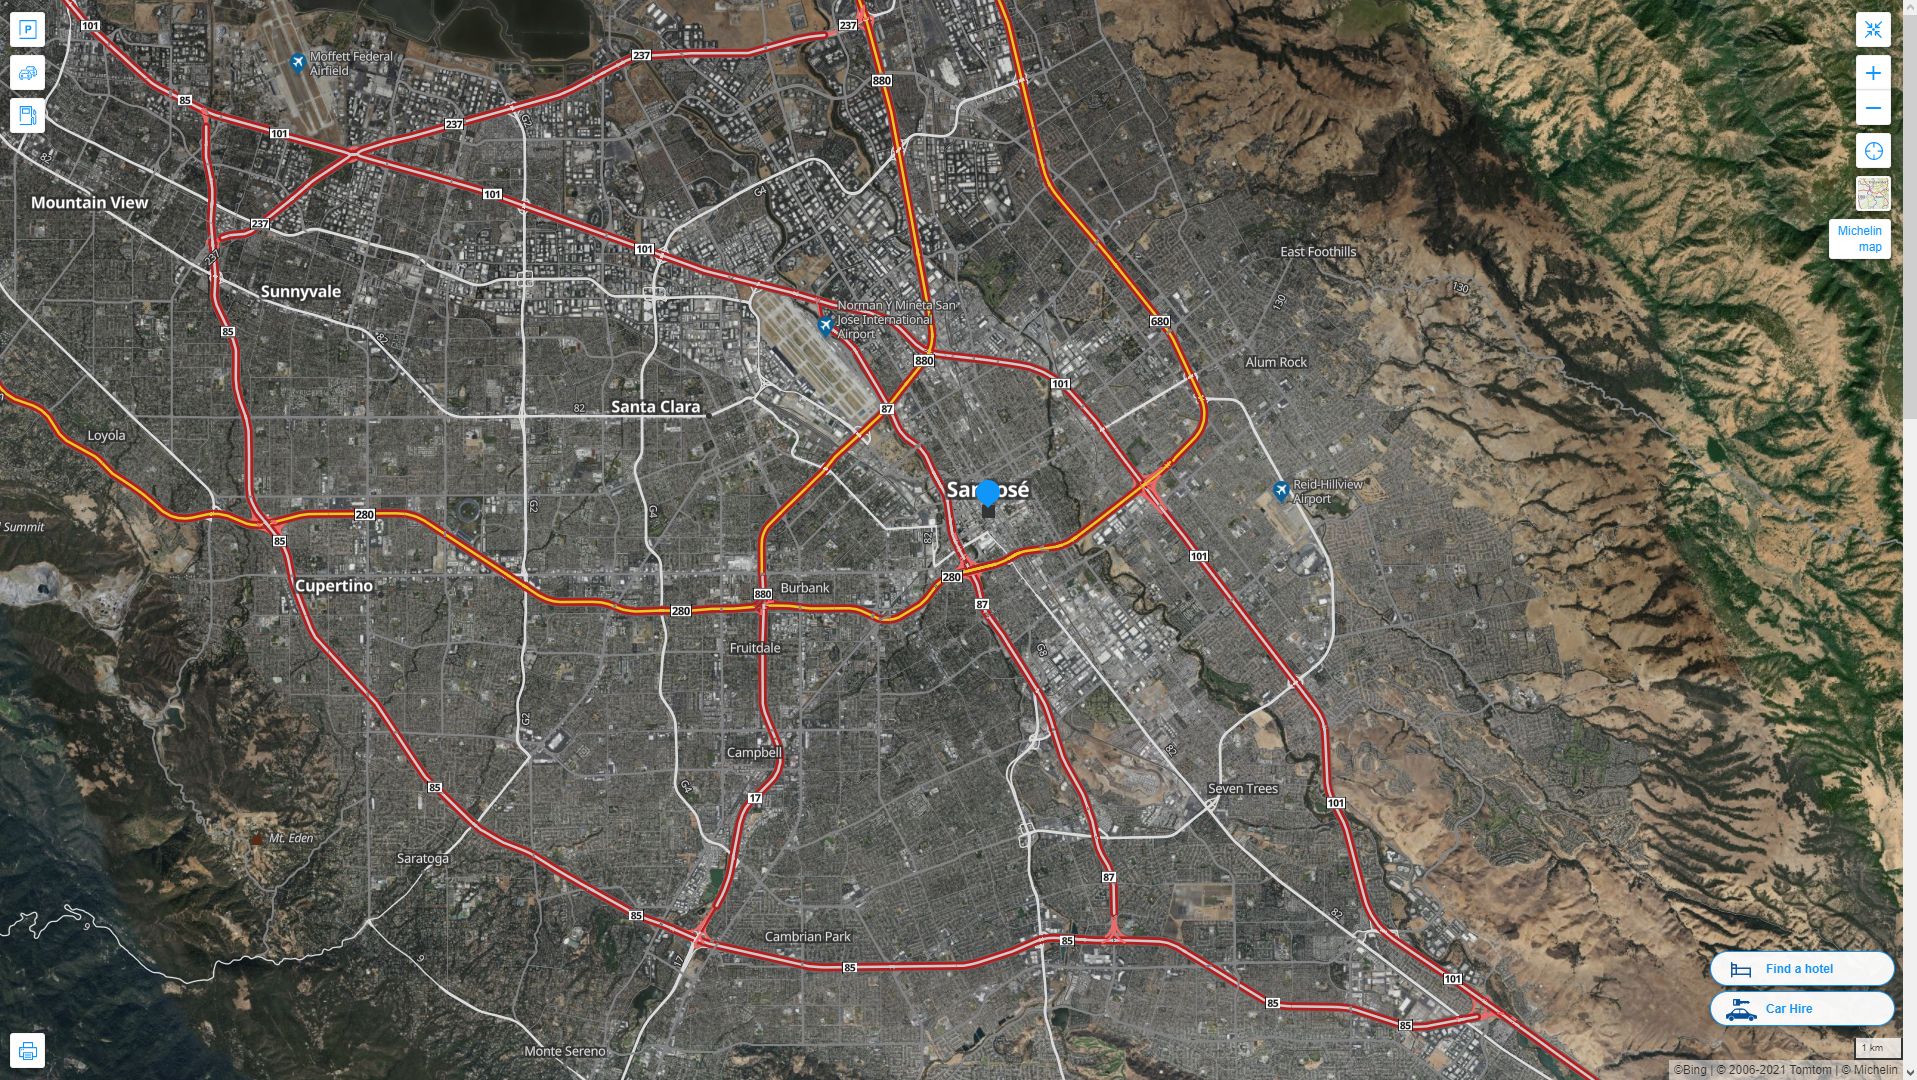 San Jose California Highway and Road Map with Satellite View